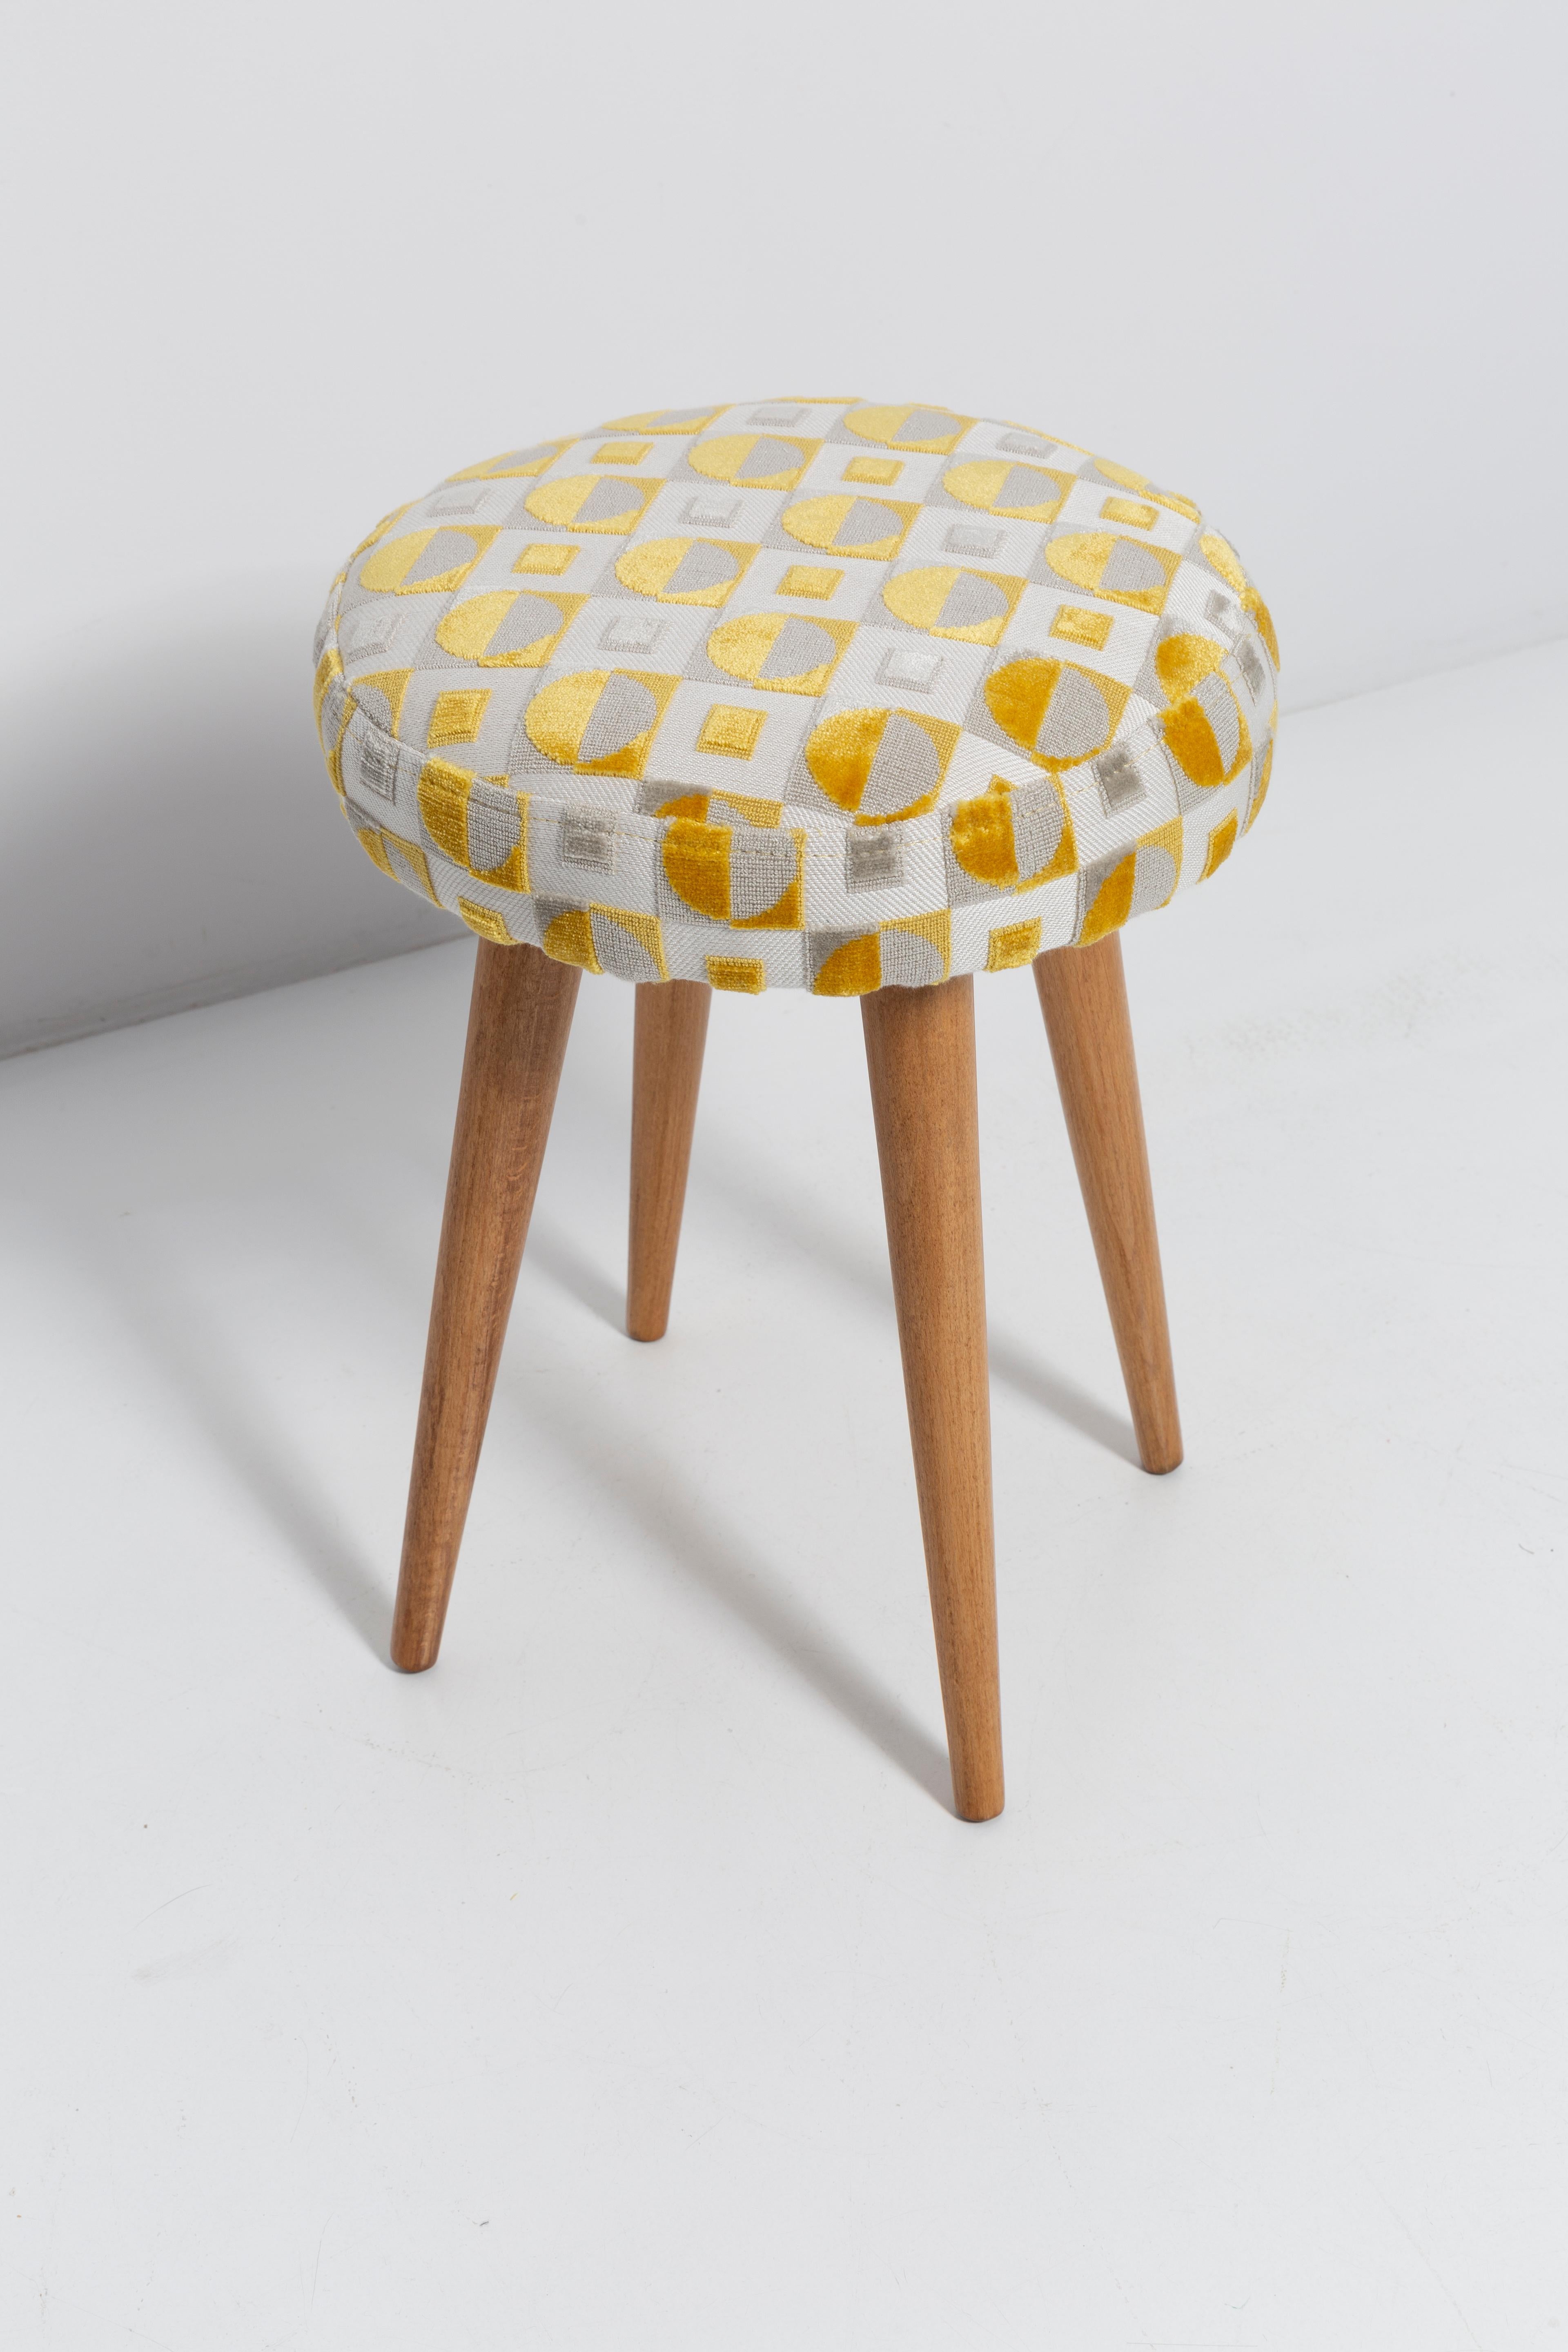 Polish Set of Two Mid Century Yellow and Beige Stools, Europe, 1960s For Sale